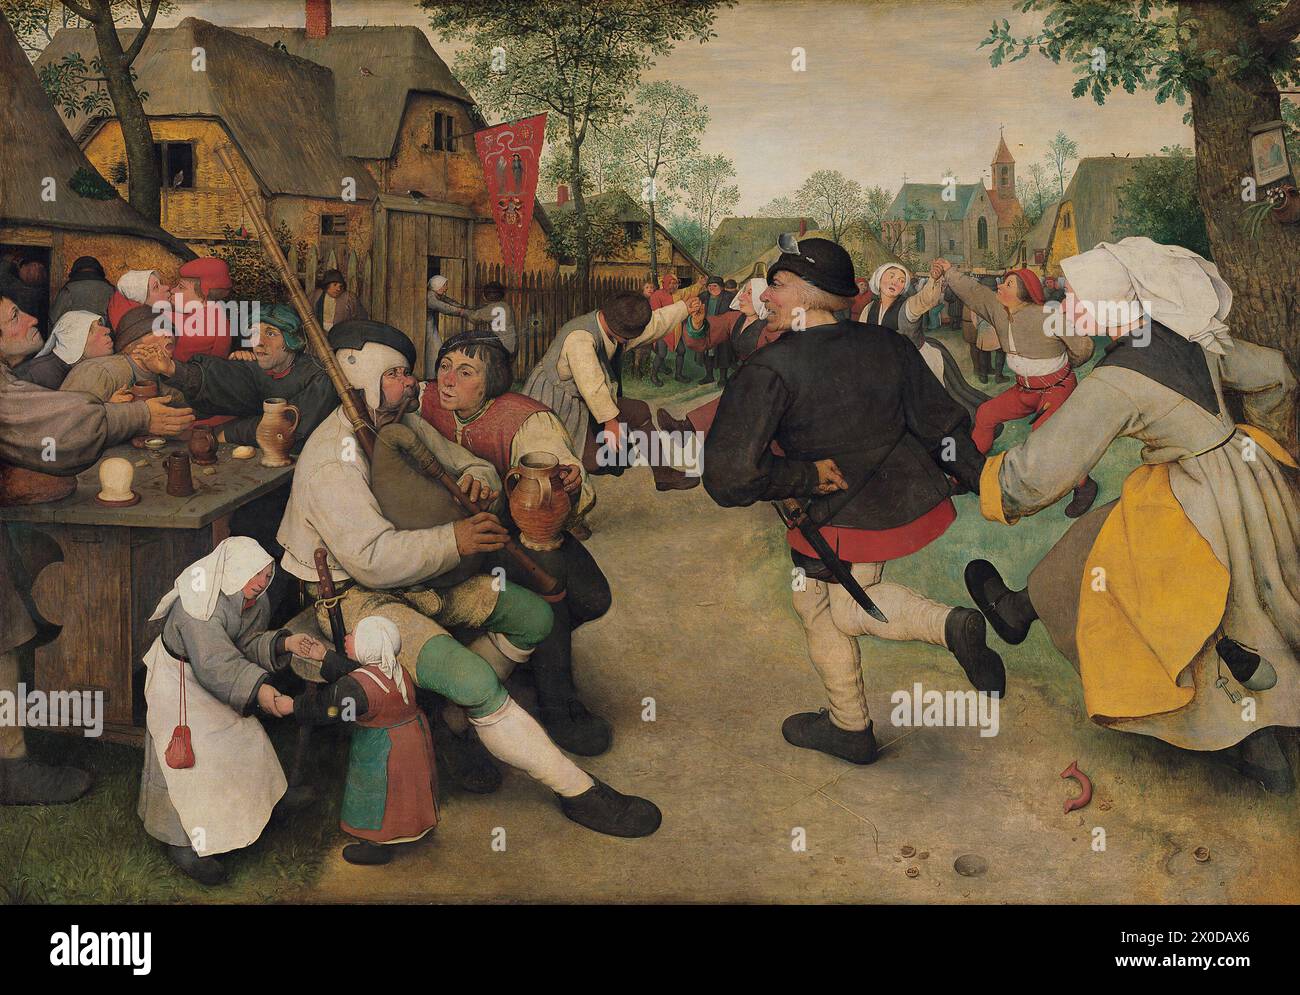 The Peasant Dance is an oil-on-panel by the Netherlandish Renaissance artist Pieter Bruegel the Elder, painted in circa 1567. Stock Photo